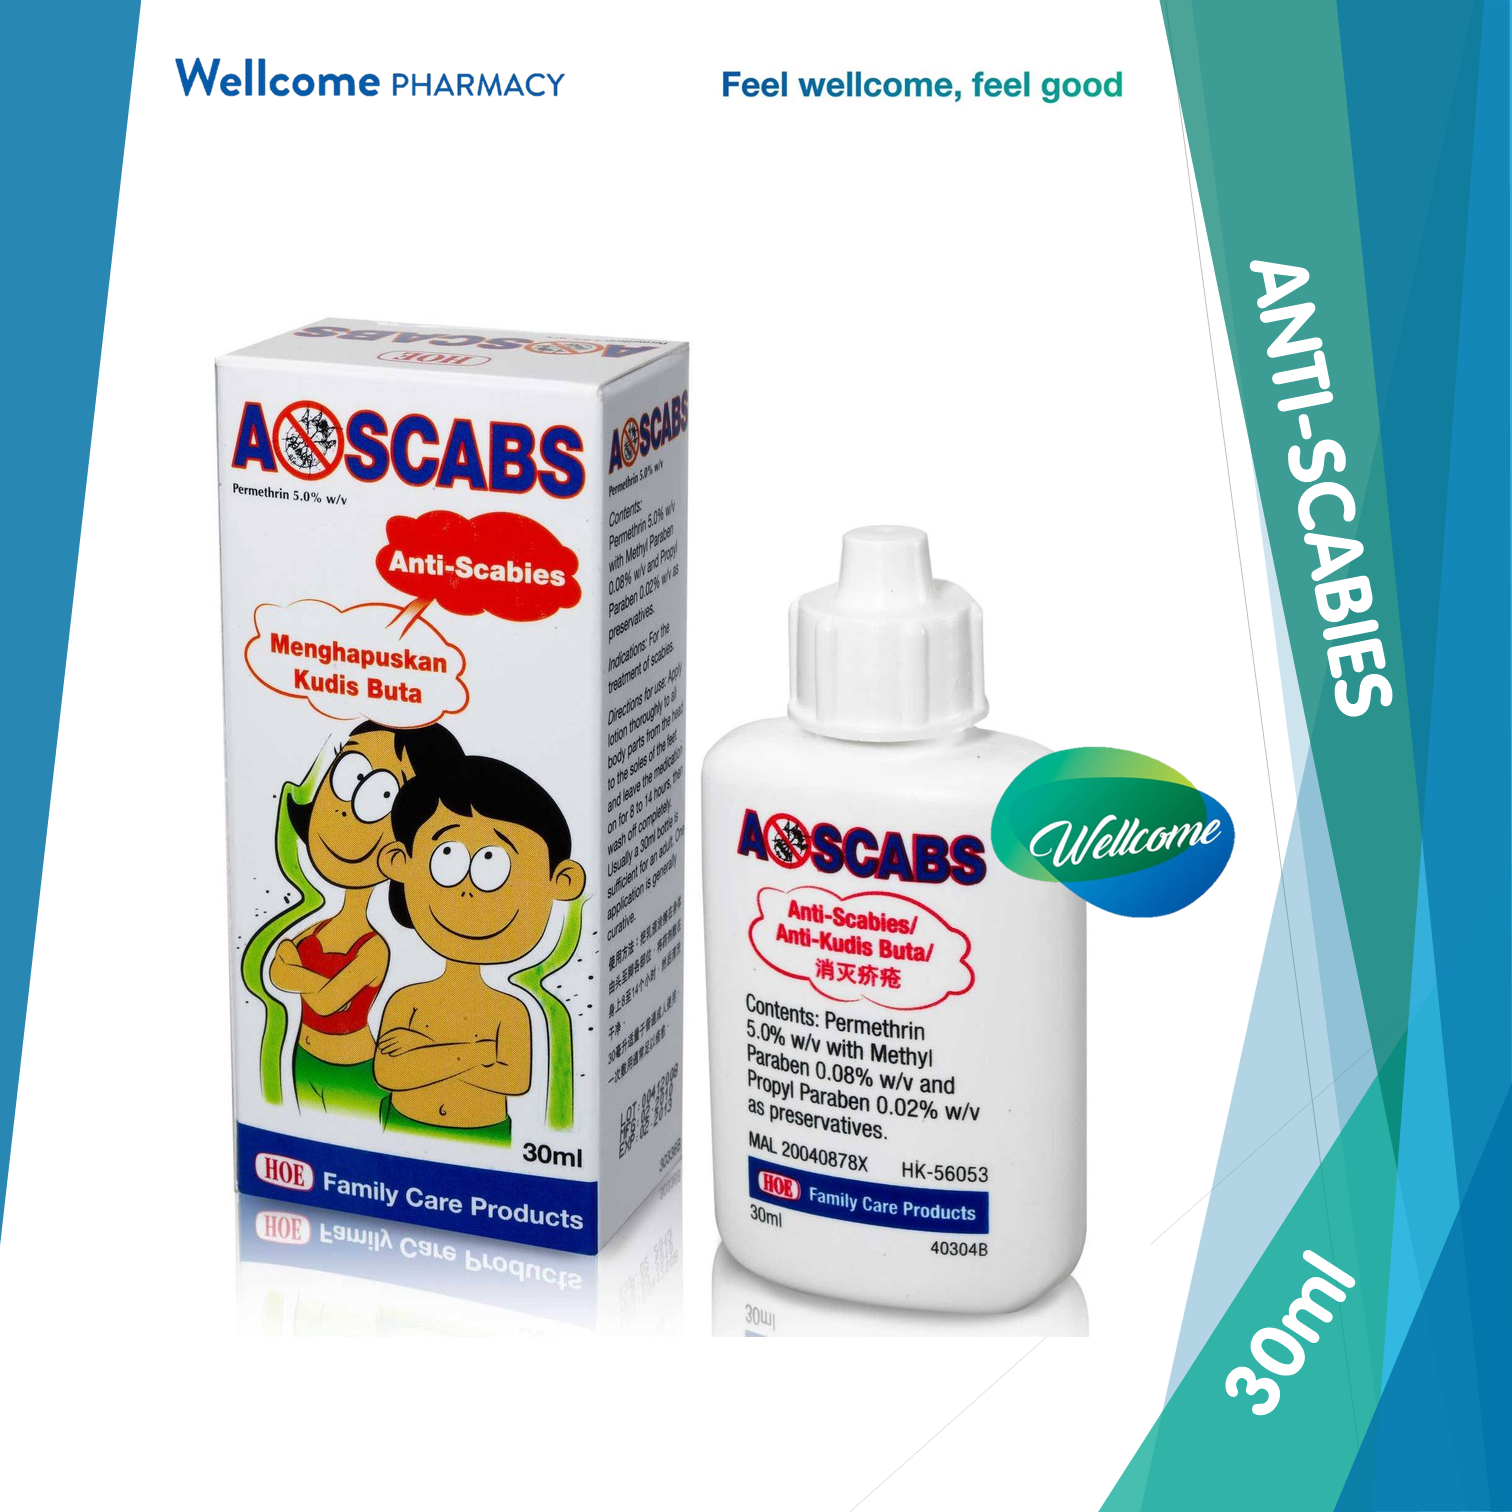 vidne Fest Smidighed HOE A-Scabs Lotion with 5% Permethrin for Scabies - 30ml – Wellcome Pharmacy